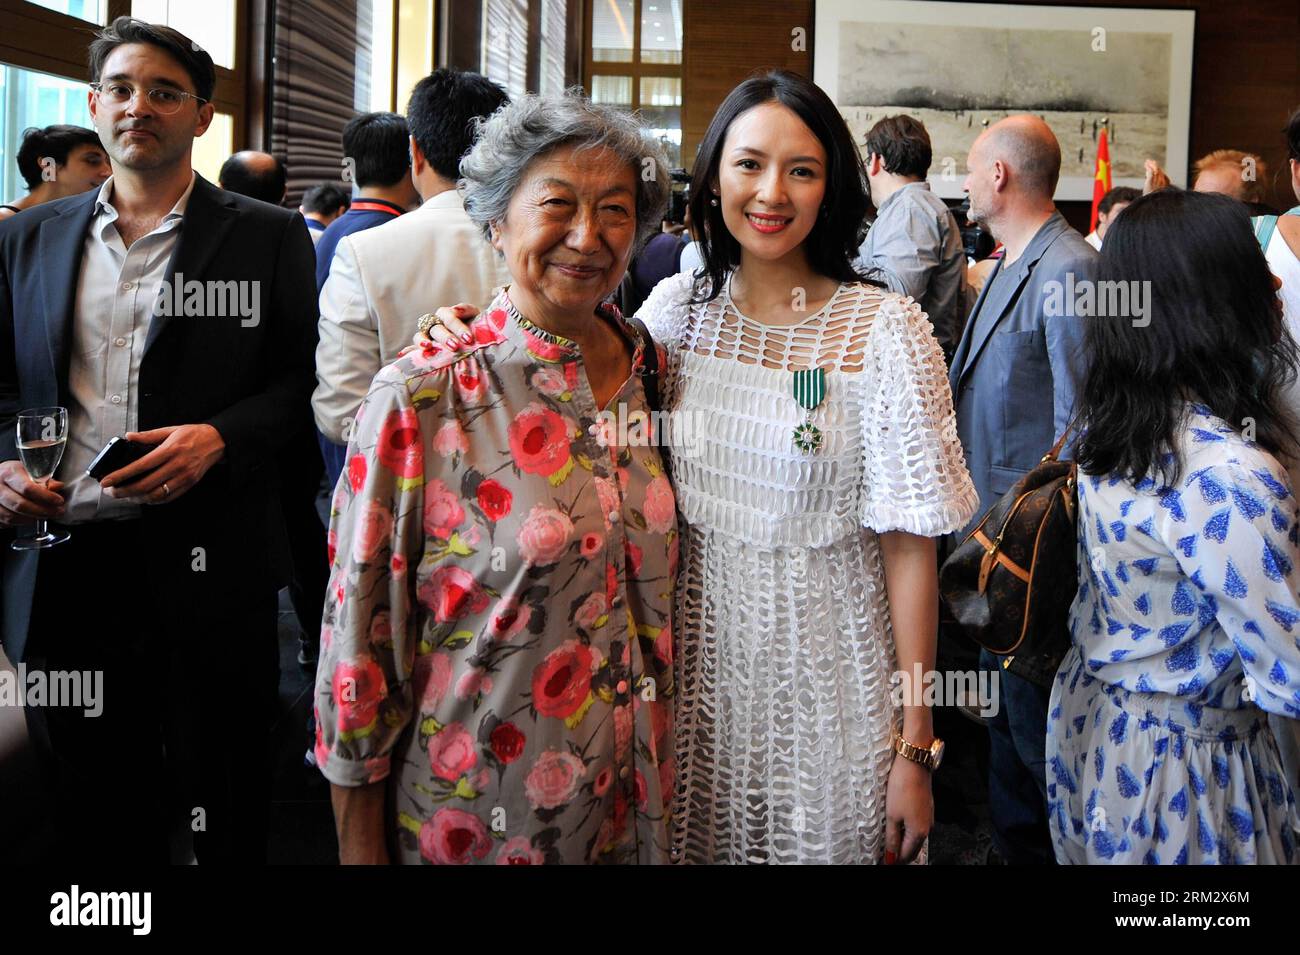 Bildnummer: 59910943  Datum: 27.06.2013  Copyright: imago/Xinhua (130627) -- BEIJING, June 27, 2013 (Xinhua) -- Actress Zhang Ziyi (R) poses for photo with her tutor Professor Chang Li after she received the Order of Arts and Letters by the French government in Beijing, capital of China, June 27, 2013. Established in 1957, the order is the recognition of significant contributions to the arts and literature. (Xinhua/Pan Chaoyue) (mp) CHINA-BEIJING-ORDER OF ARTS AND LETTERS (CN) PUBLICATIONxNOTxINxCHN People Entertainment Kultur Film Ehrung Auszeichnung xbs x0x 2013 quer      59910943 Date 27 06 Stock Photo